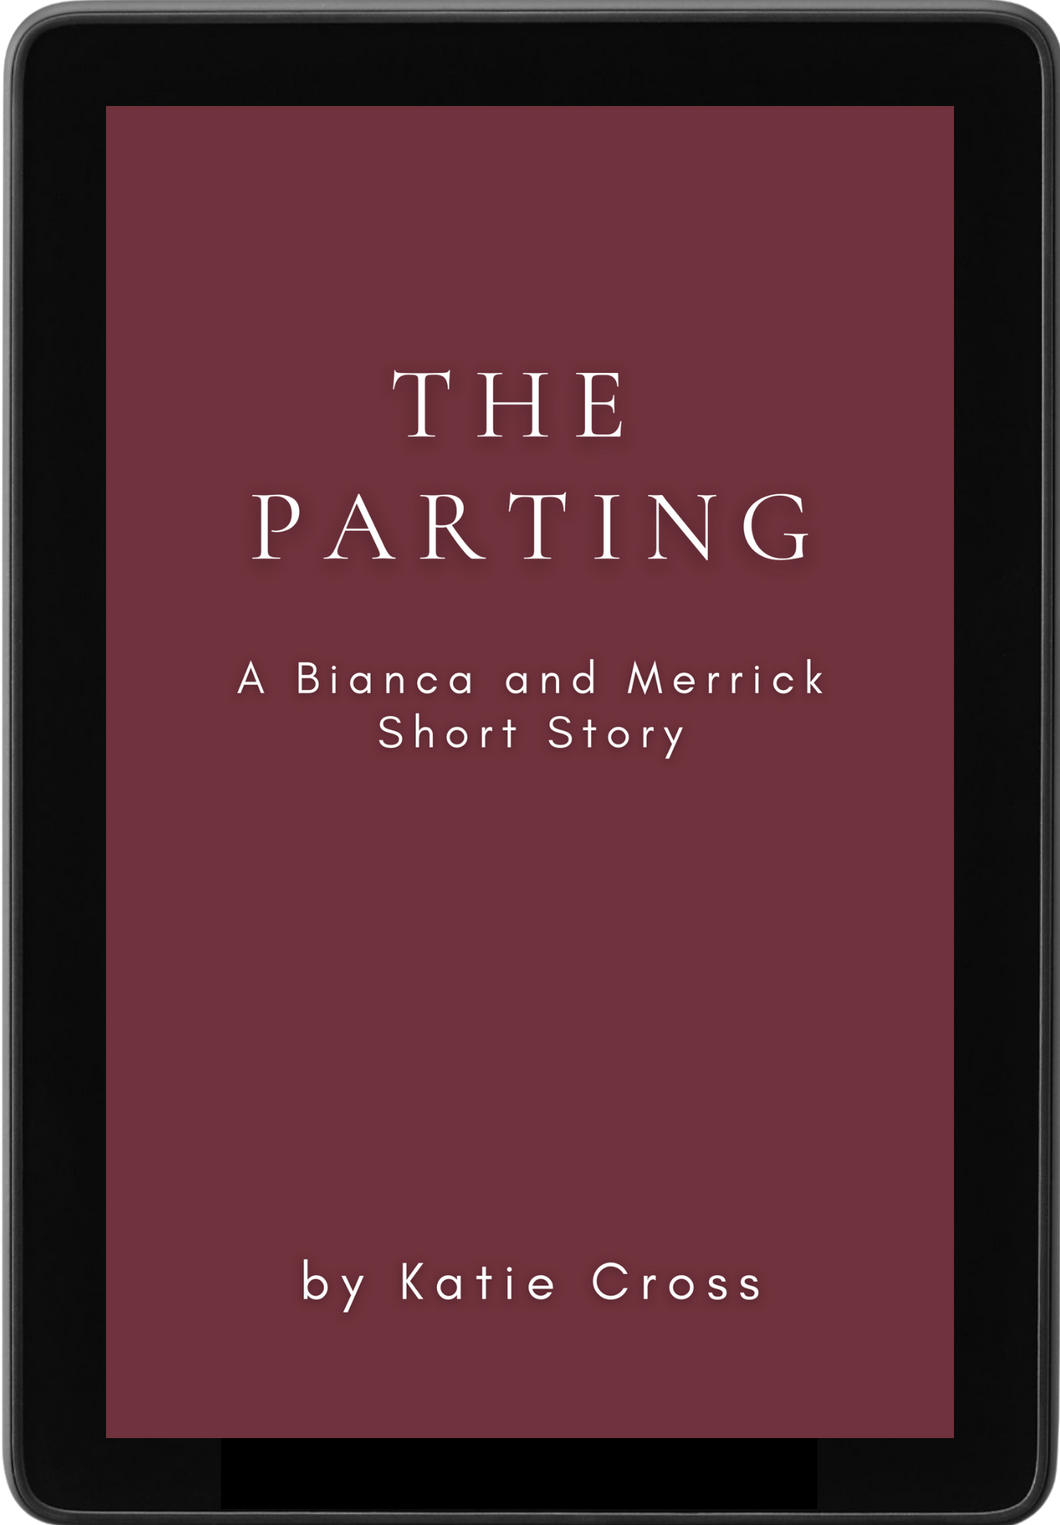 The Parting (Novella # 1 in the Network Series)